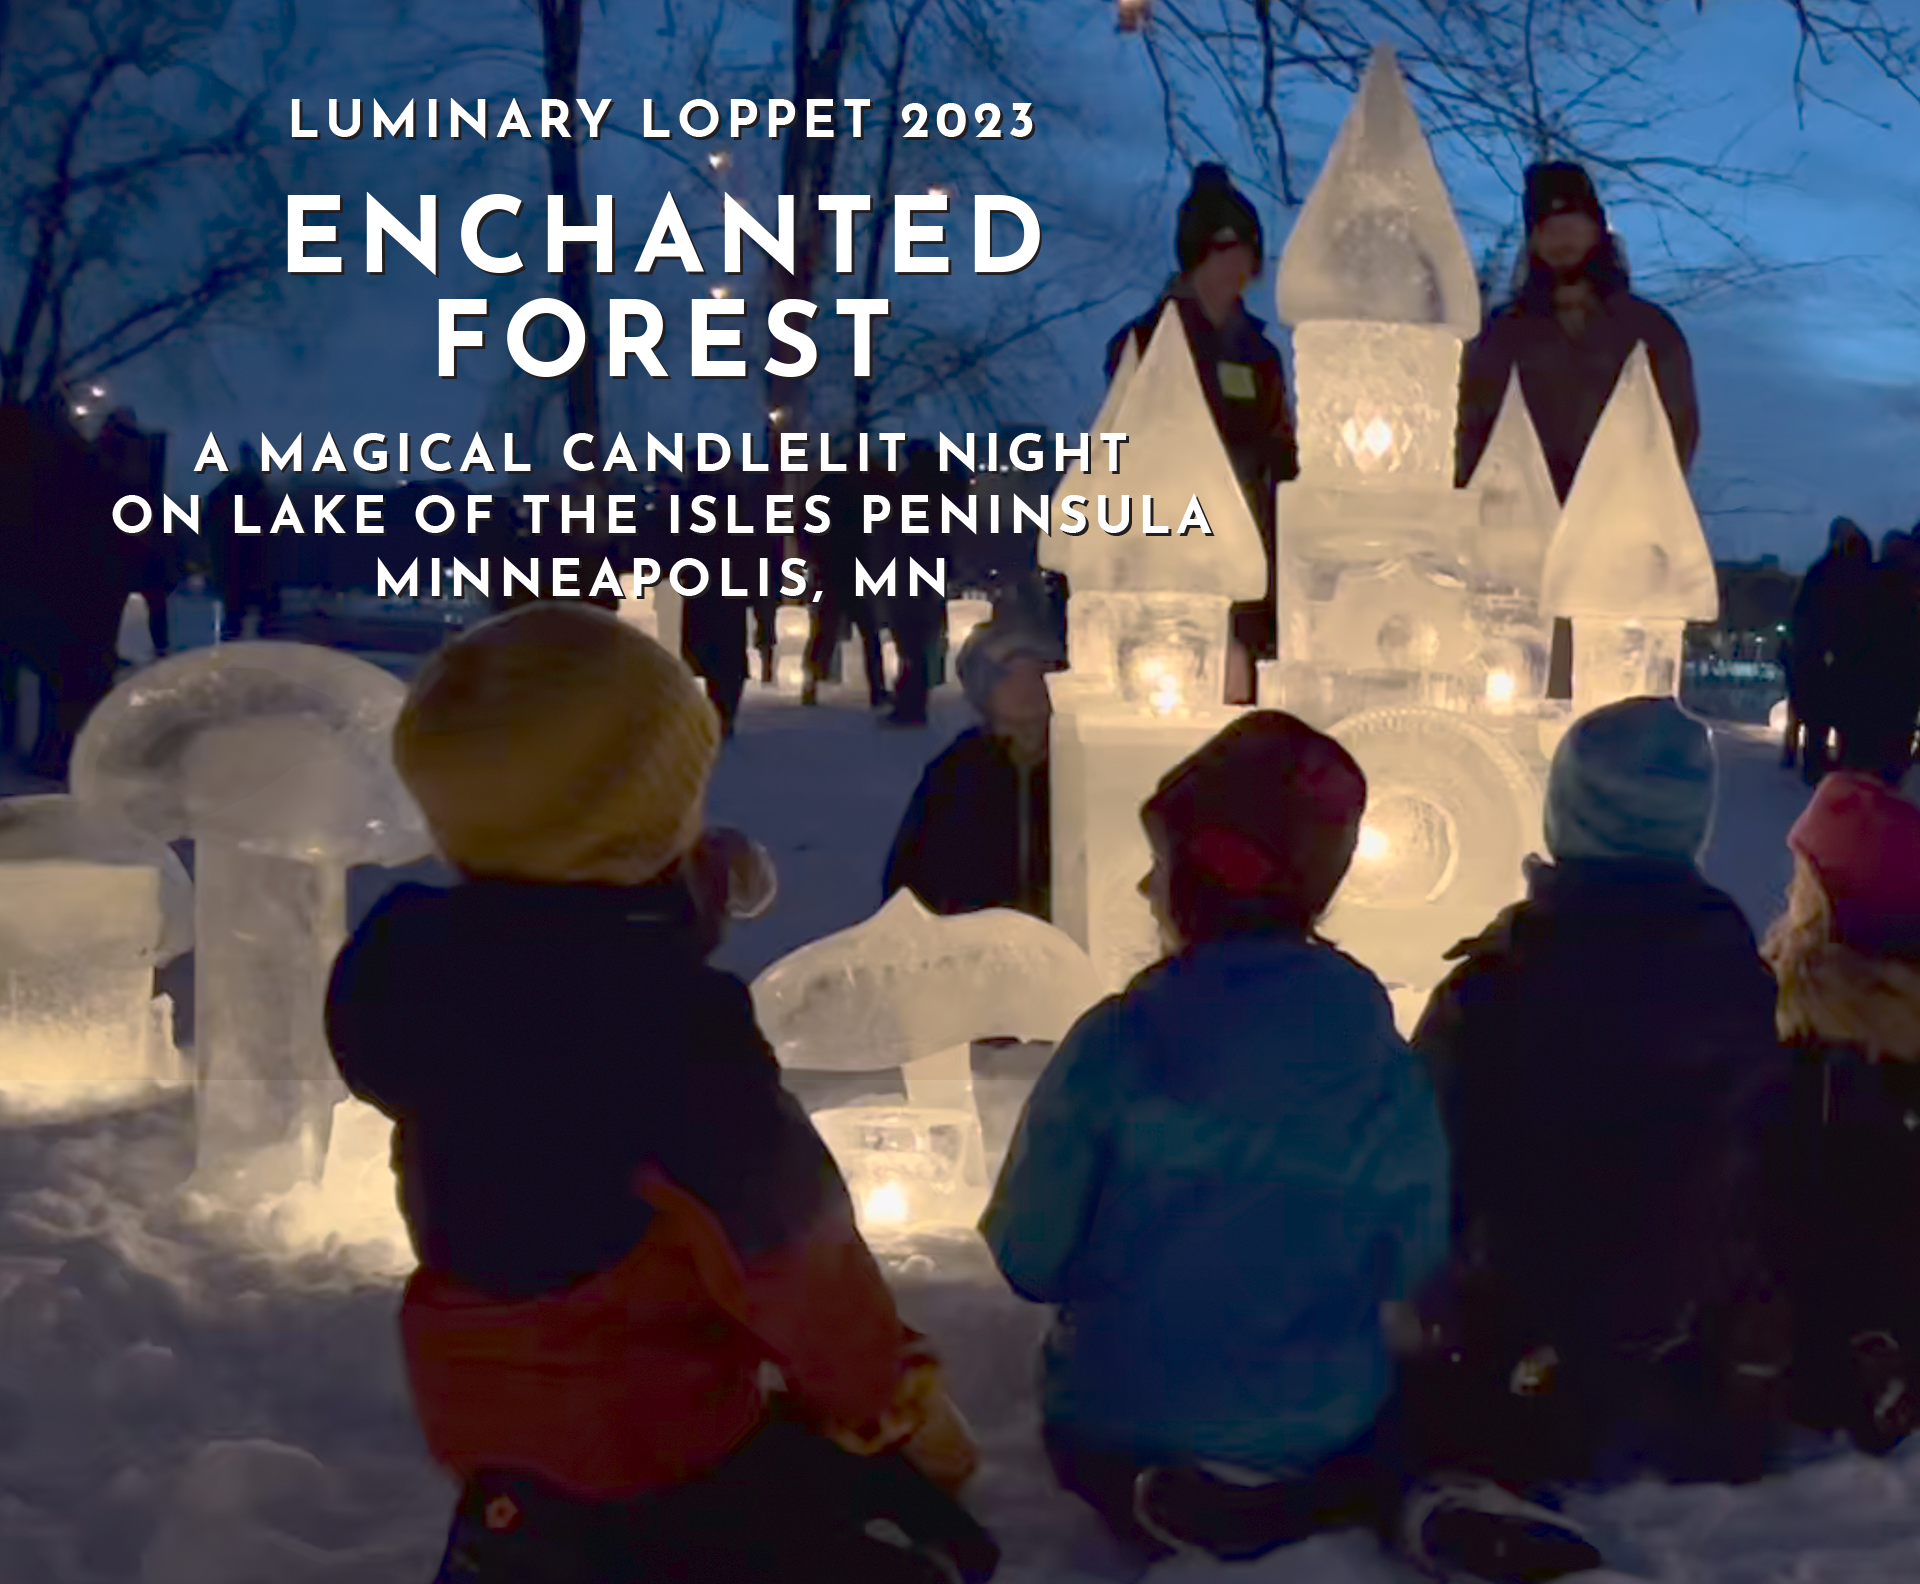 The Enchanted Forest in Minneapolis' Luminary Loppet 2023 event shone bright in this blog and video documenting he magic and beauty of the event.